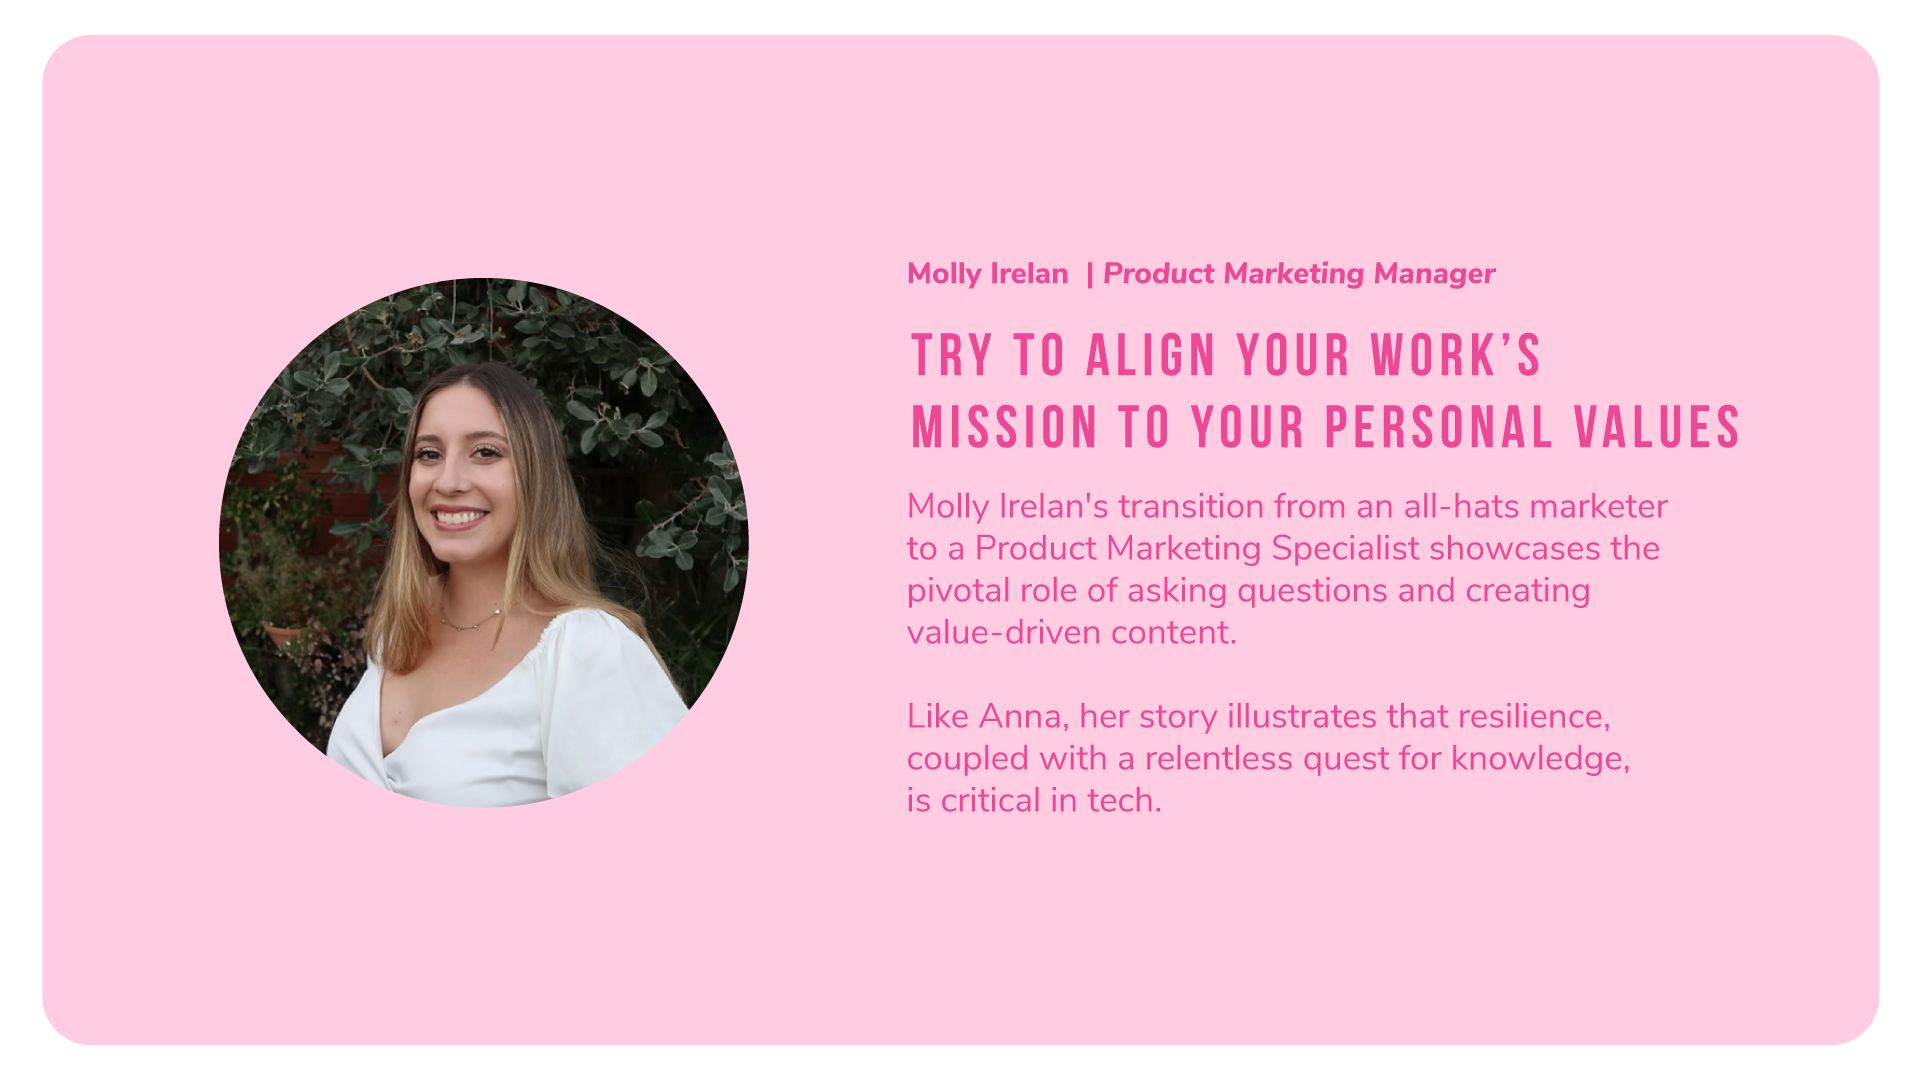 Molly Irelan of Alkami says: Try to align your work's mission to your personal values